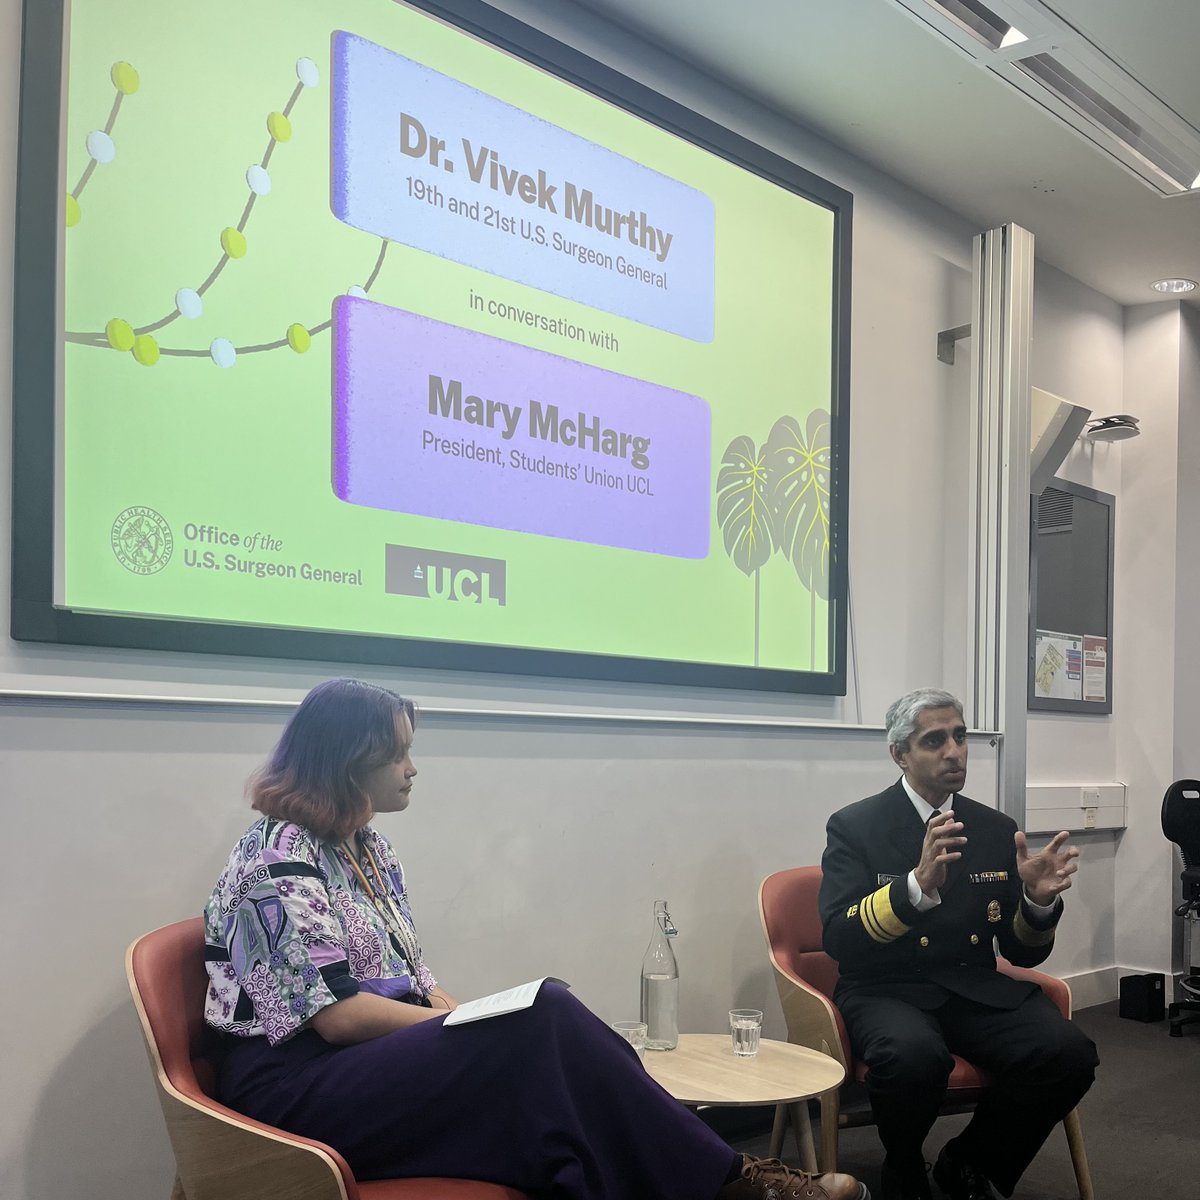 Each of us can take small steps to feel more connected, and my conversation with Mary McHarg and other @ucl students highlighted just how vital this is. I couldn’t have asked for a better opportunity to build on the “We Are #MadeToConnect” tour and hear from students in London.